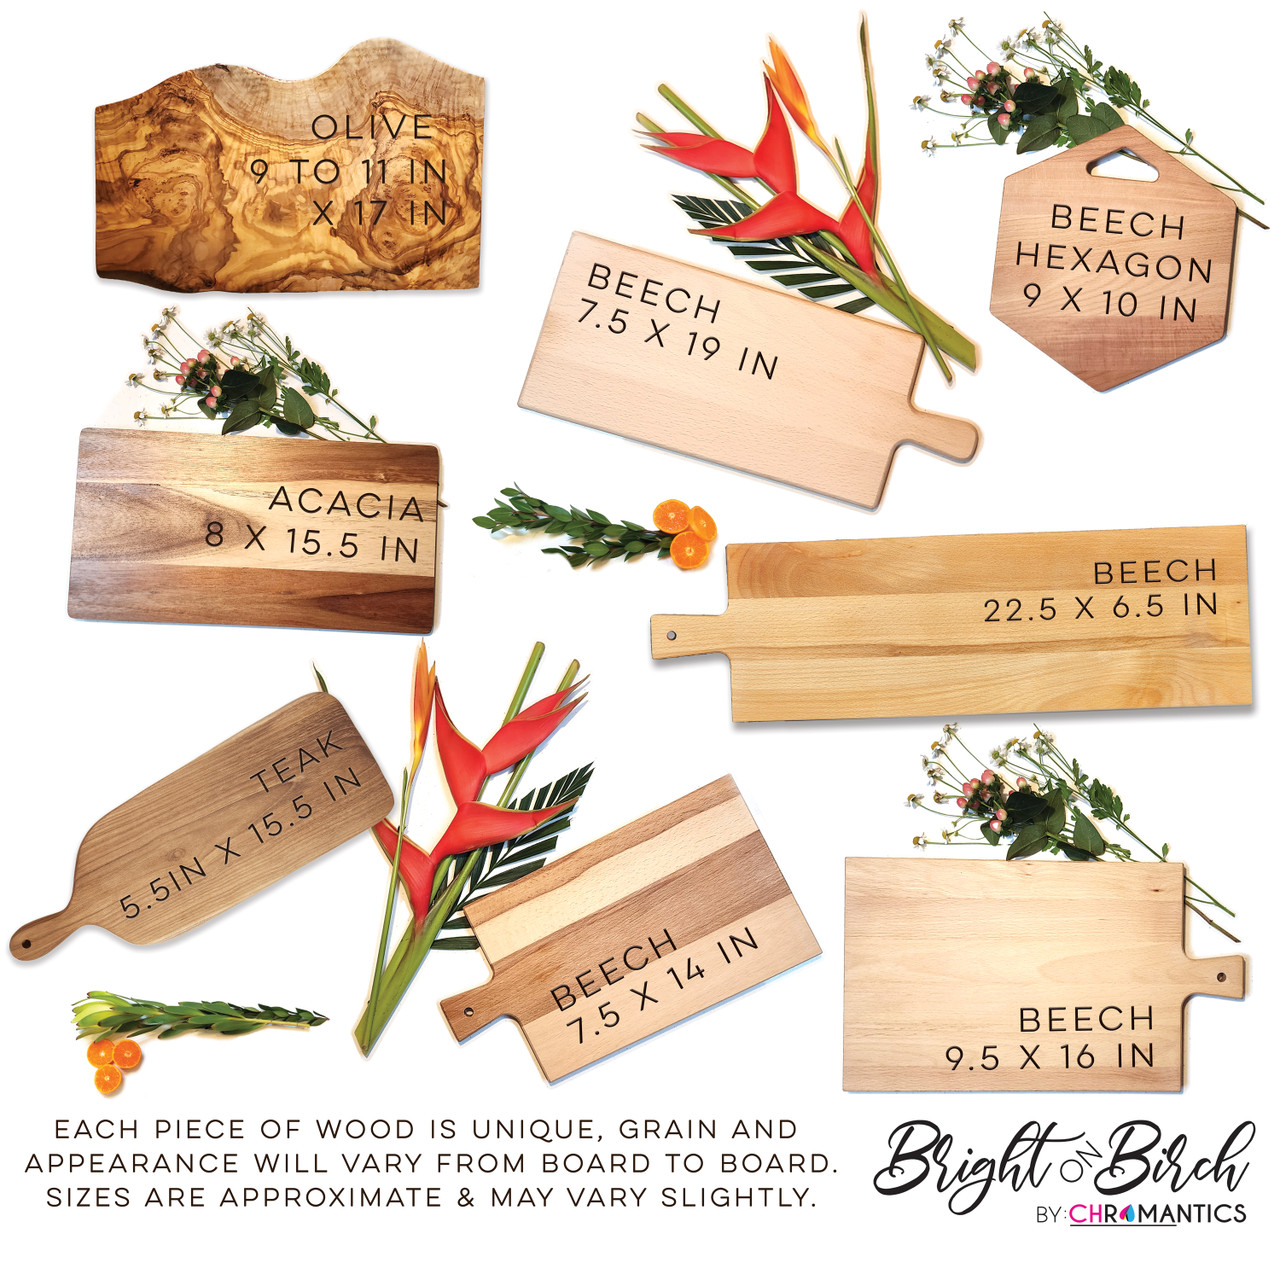 https://cdn11.bigcommerce.com/s-1ggeagg8hy/images/stencil/1280x1280/products/1077/3621/new-cutting-board-options-w-large-olive-bob-2-copy__25467.1674436139.jpg?c=2?imbypass=on